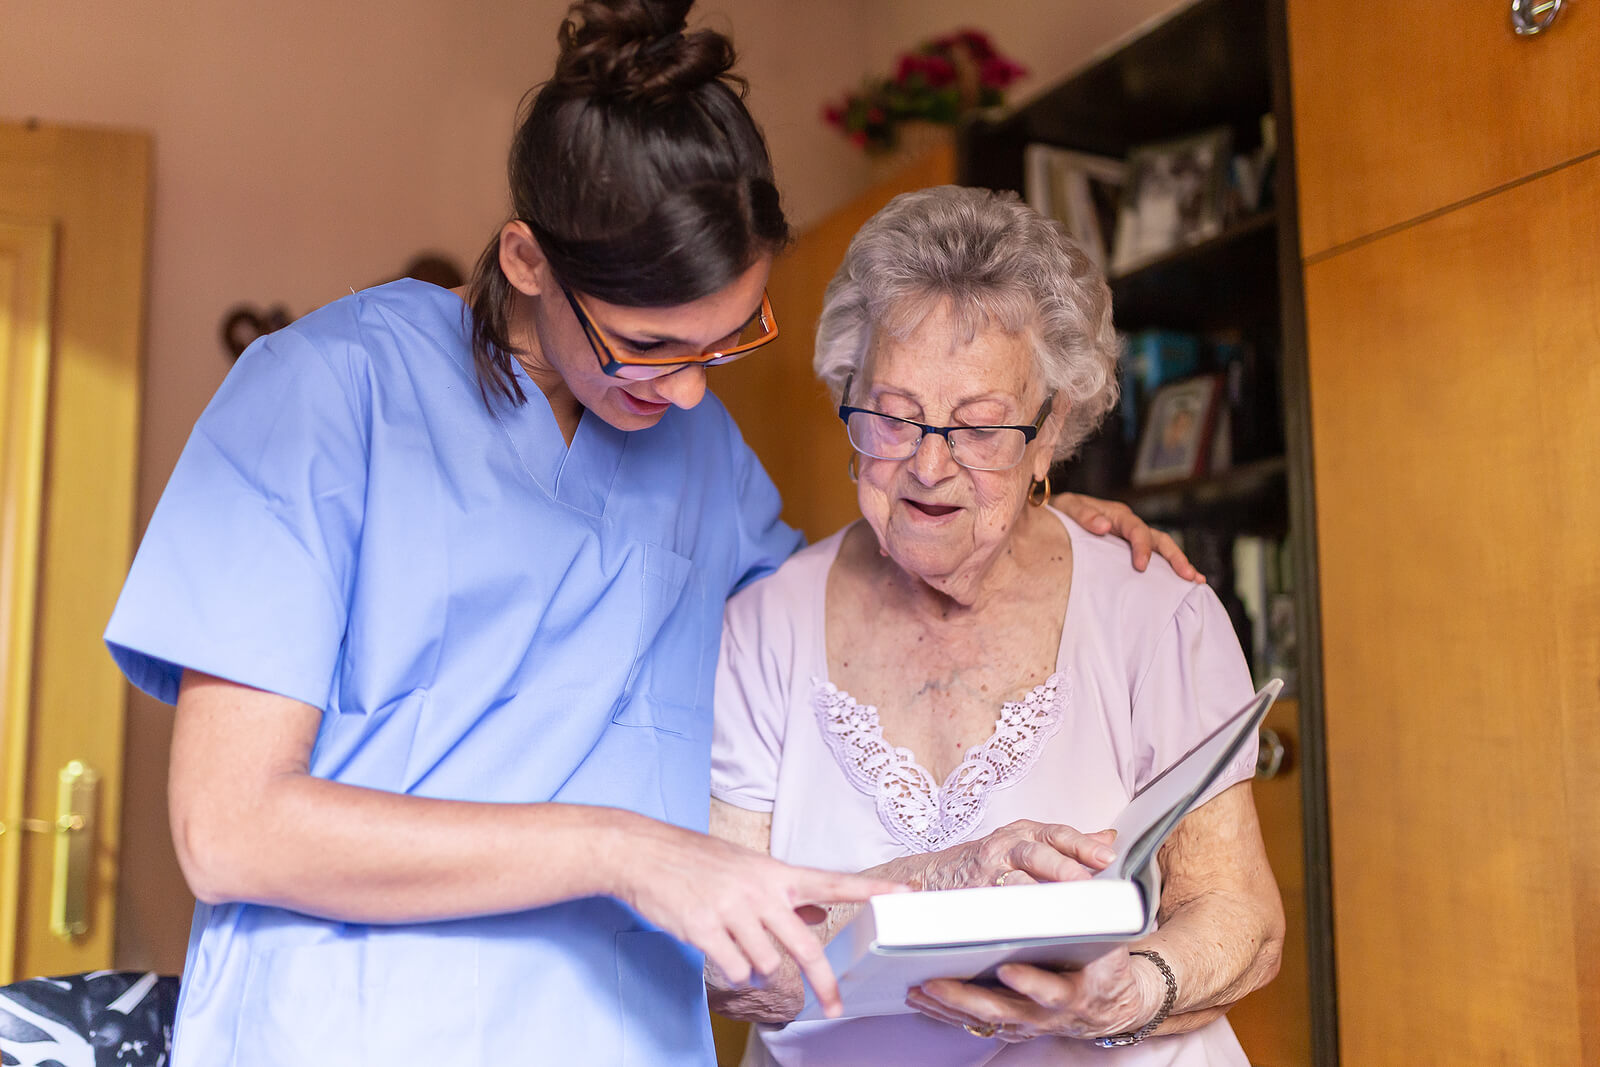 A nurse and an elderly woman looking at a book.